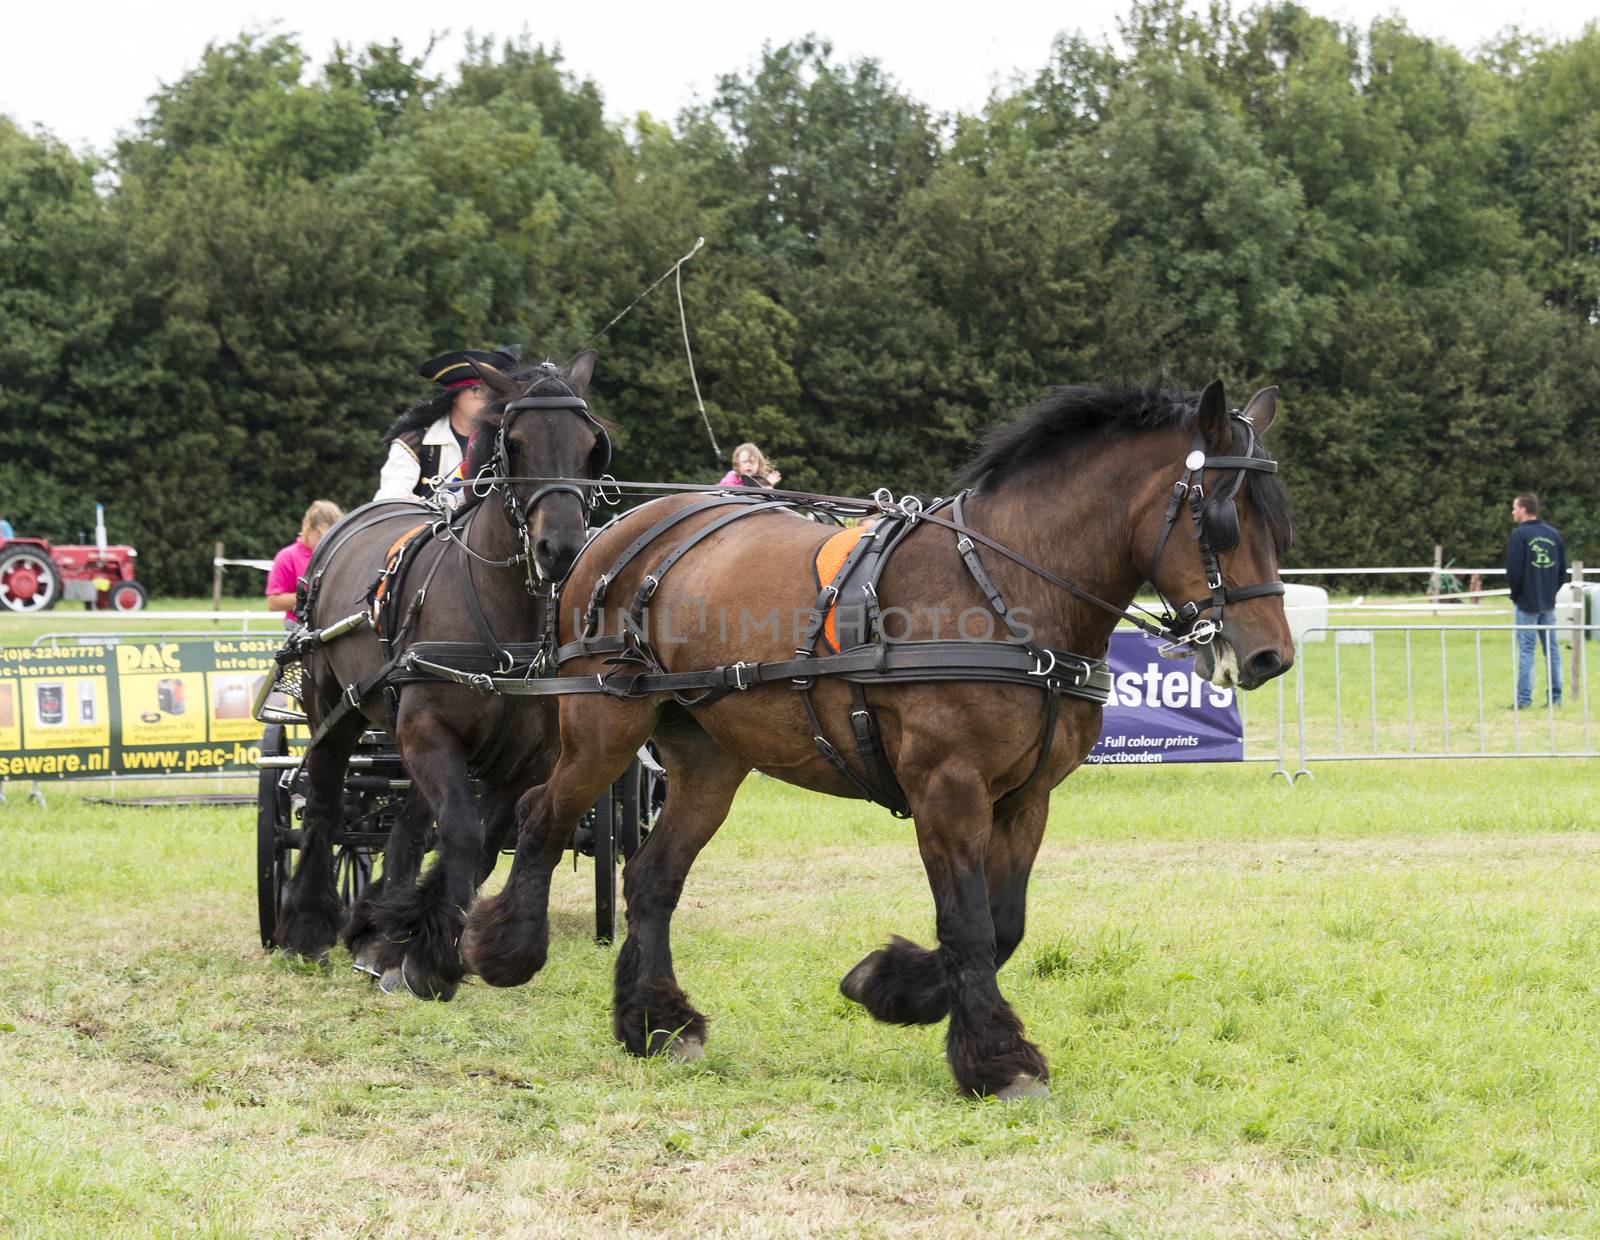 ROCKANJE, NETHERLANDS - AUGUST 18, 2015: Unknown people participate in the power horse competition in Rockanje on August 18 2015. This competition is for international points